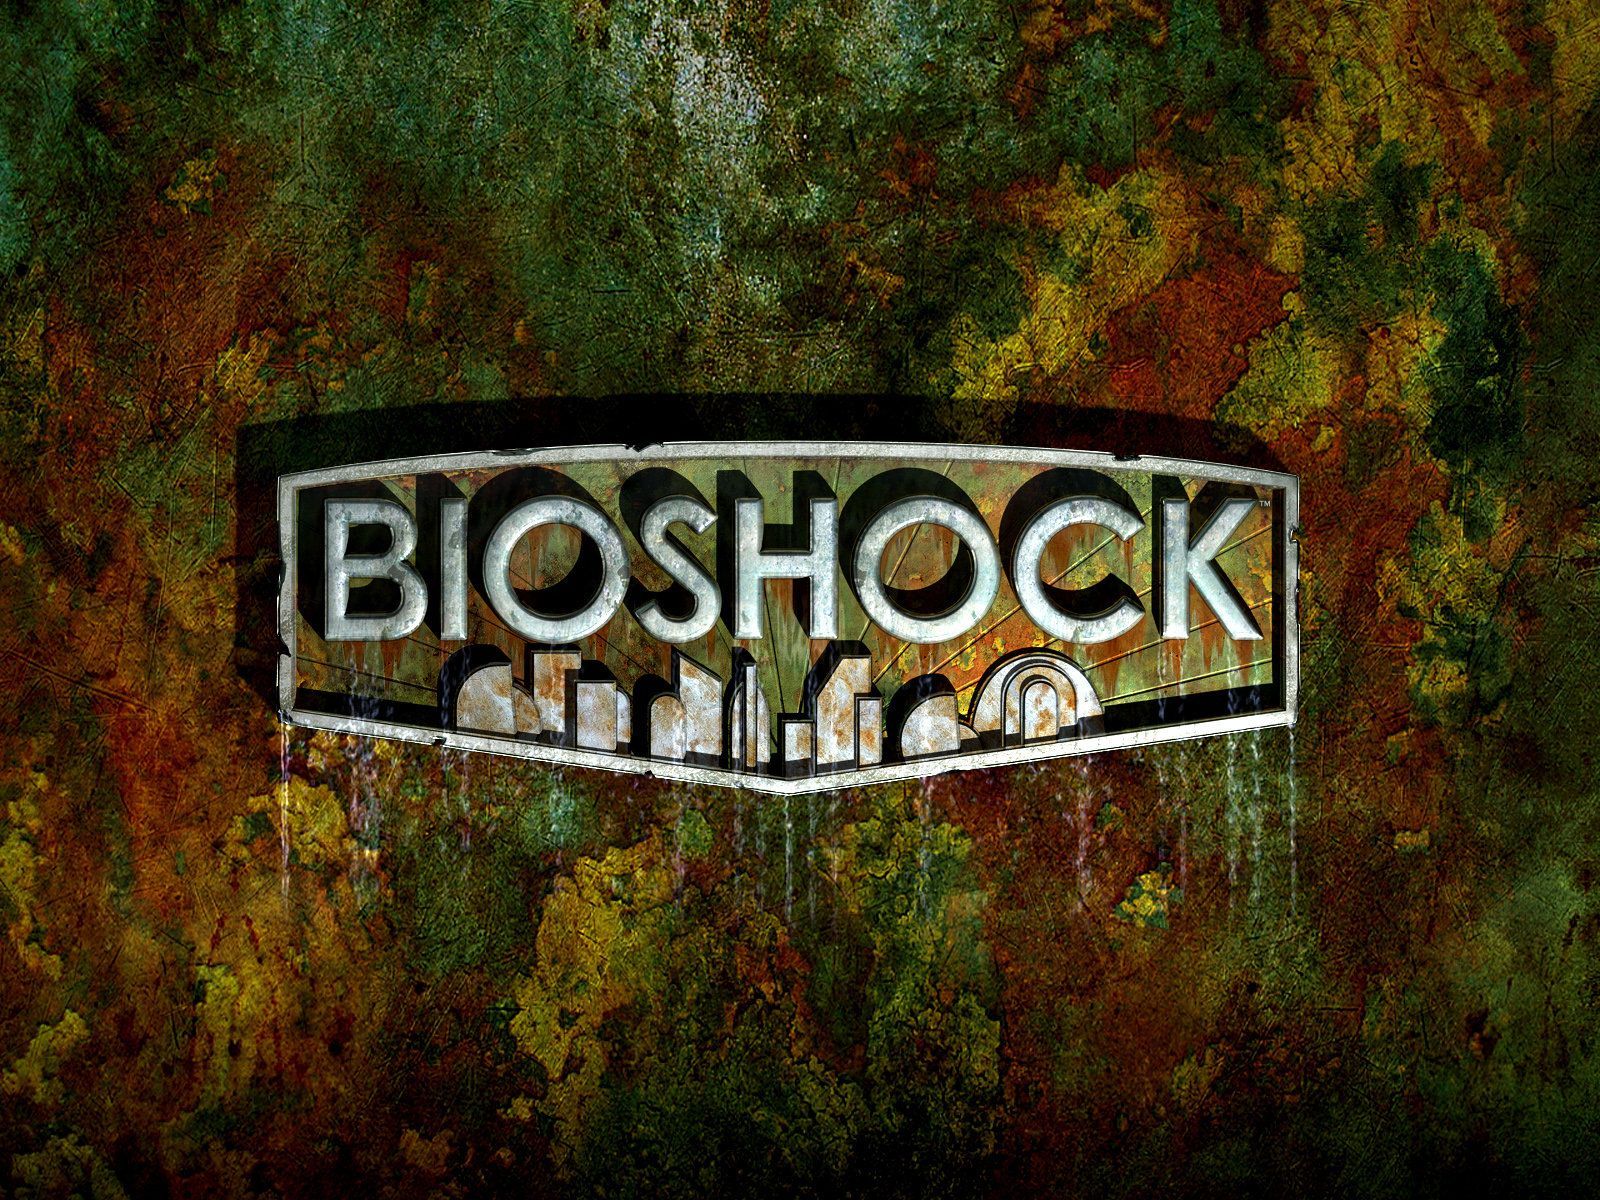 Bioshock wallpapers and images - wallpapers, pictures, photos